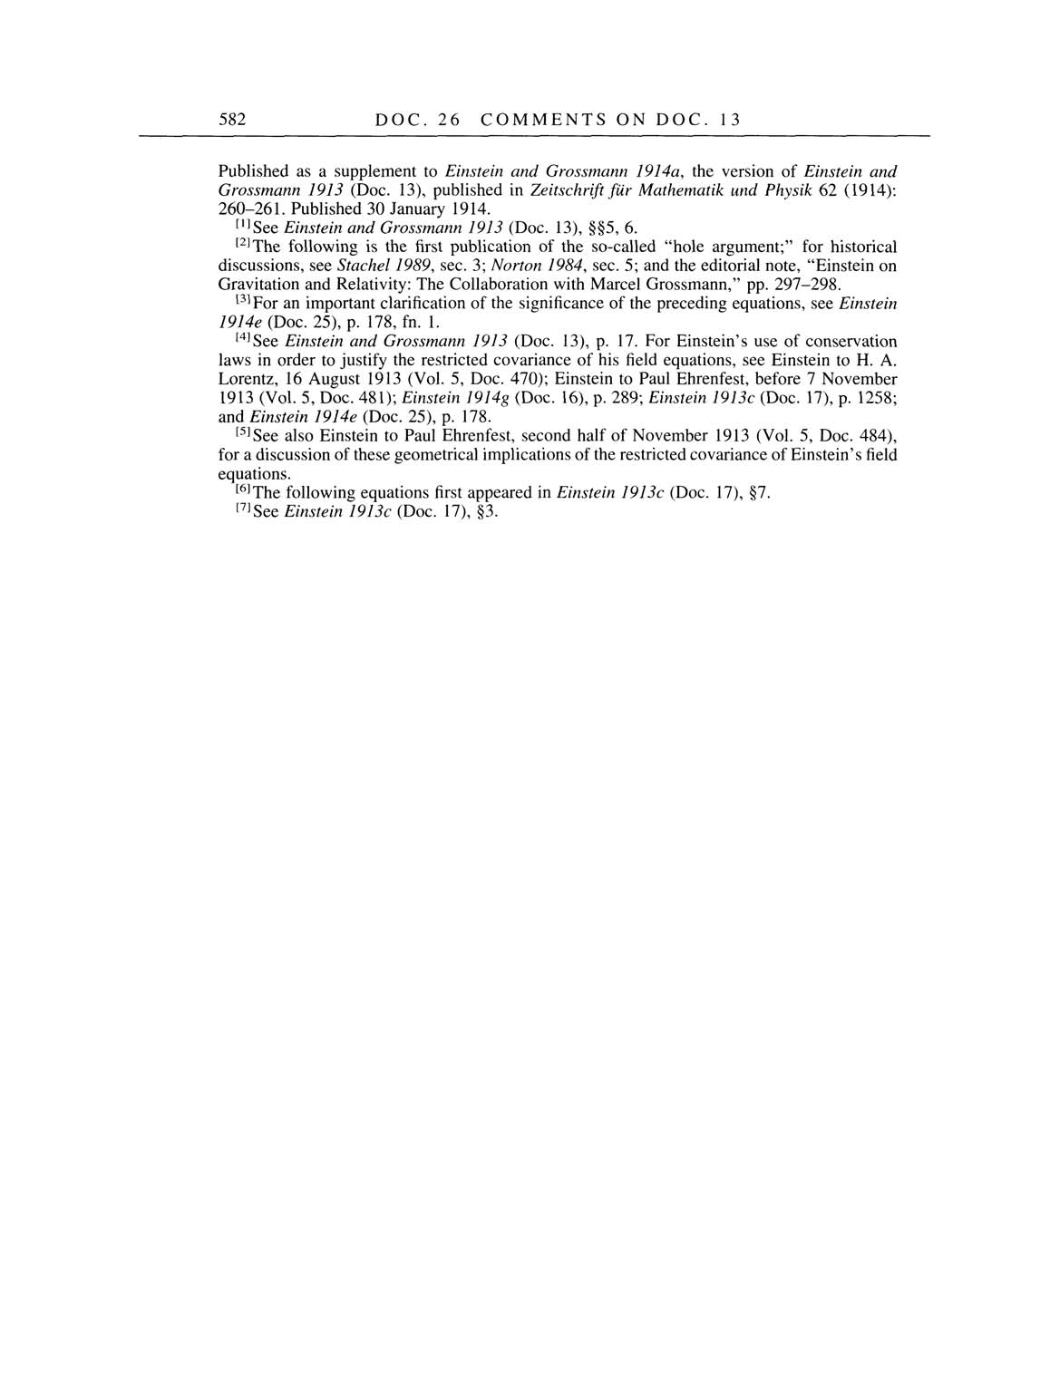 Volume 4: The Swiss Years: Writings 1912-1914 page 582